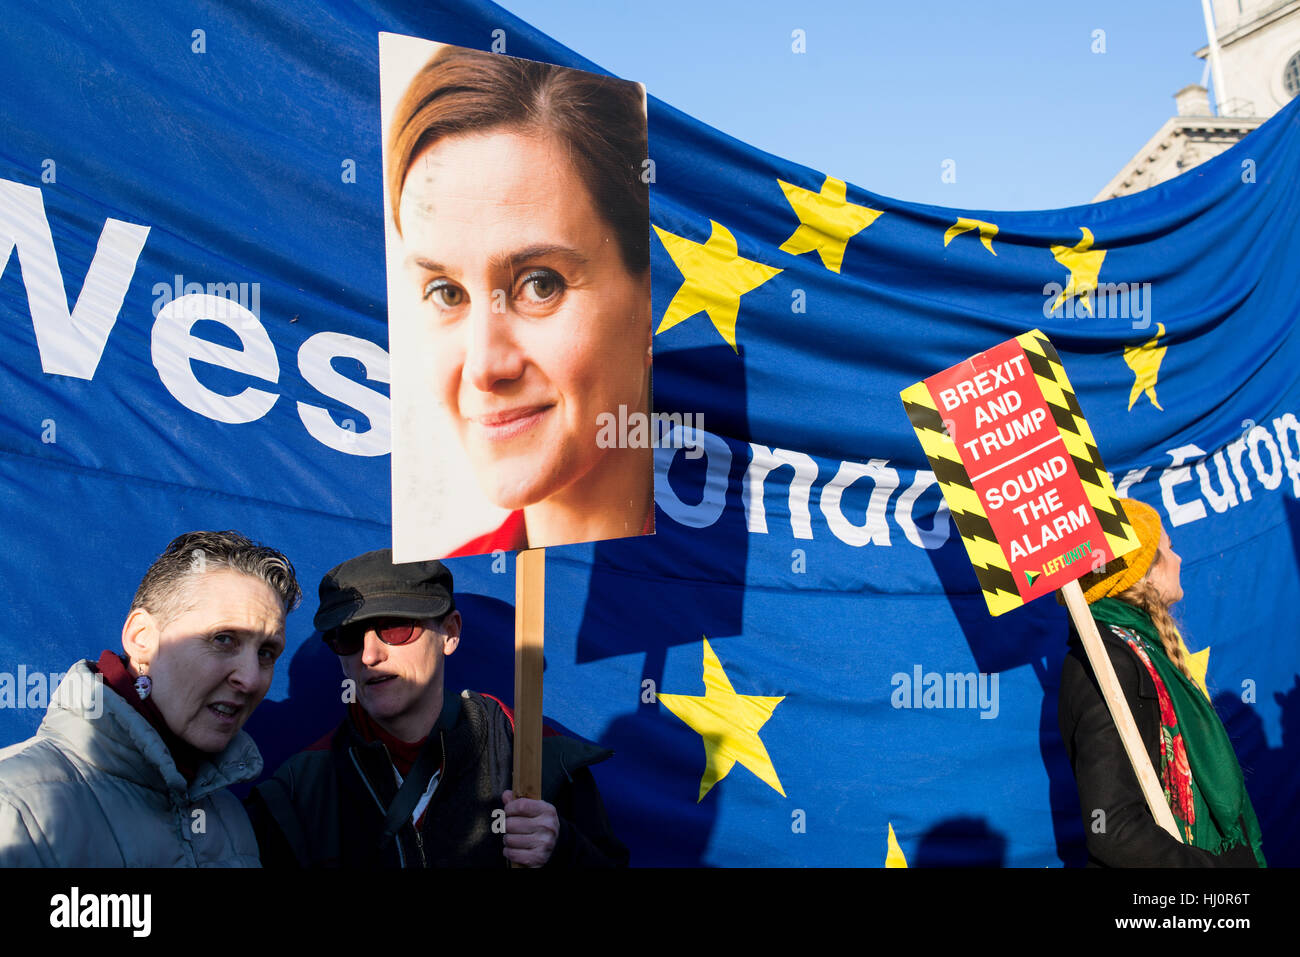 London, UK - 21 January 2017. Protesters holding Jo Cox poster and anti brexit sign standing in front of EU flag.Thousands of protesters gathered in Trafalgar Square to attend Women's March against Donald Trump calling for human rights and equality. Stock Photo